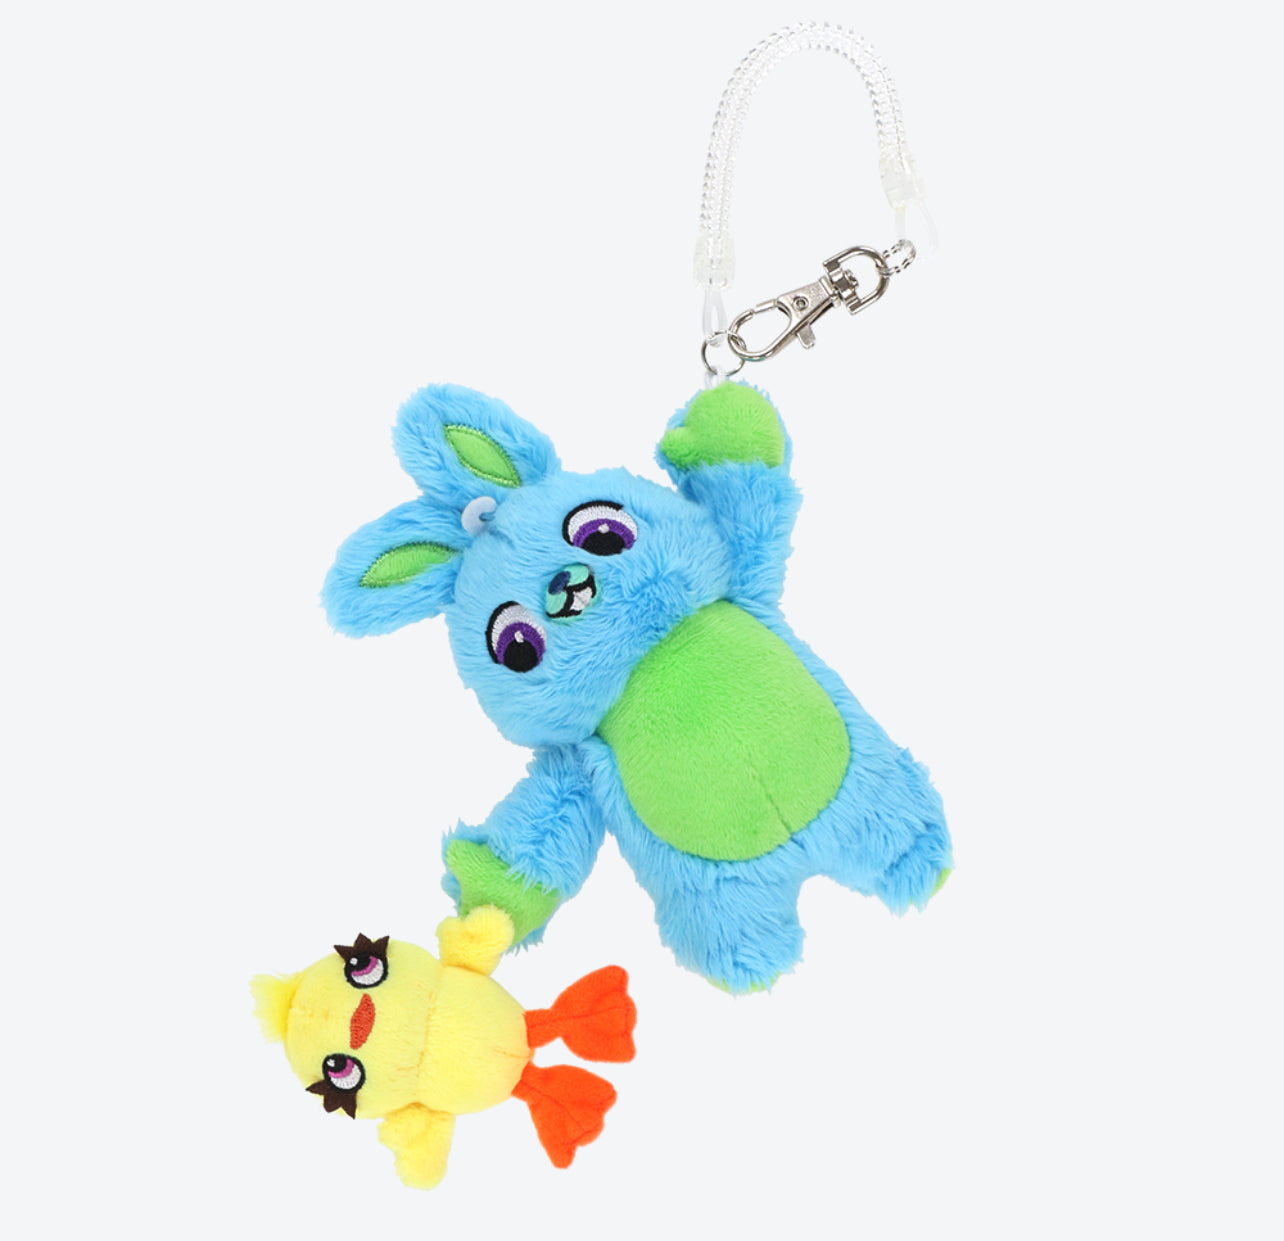 Tokyo Disney toy story ducky and bunny keychain badge